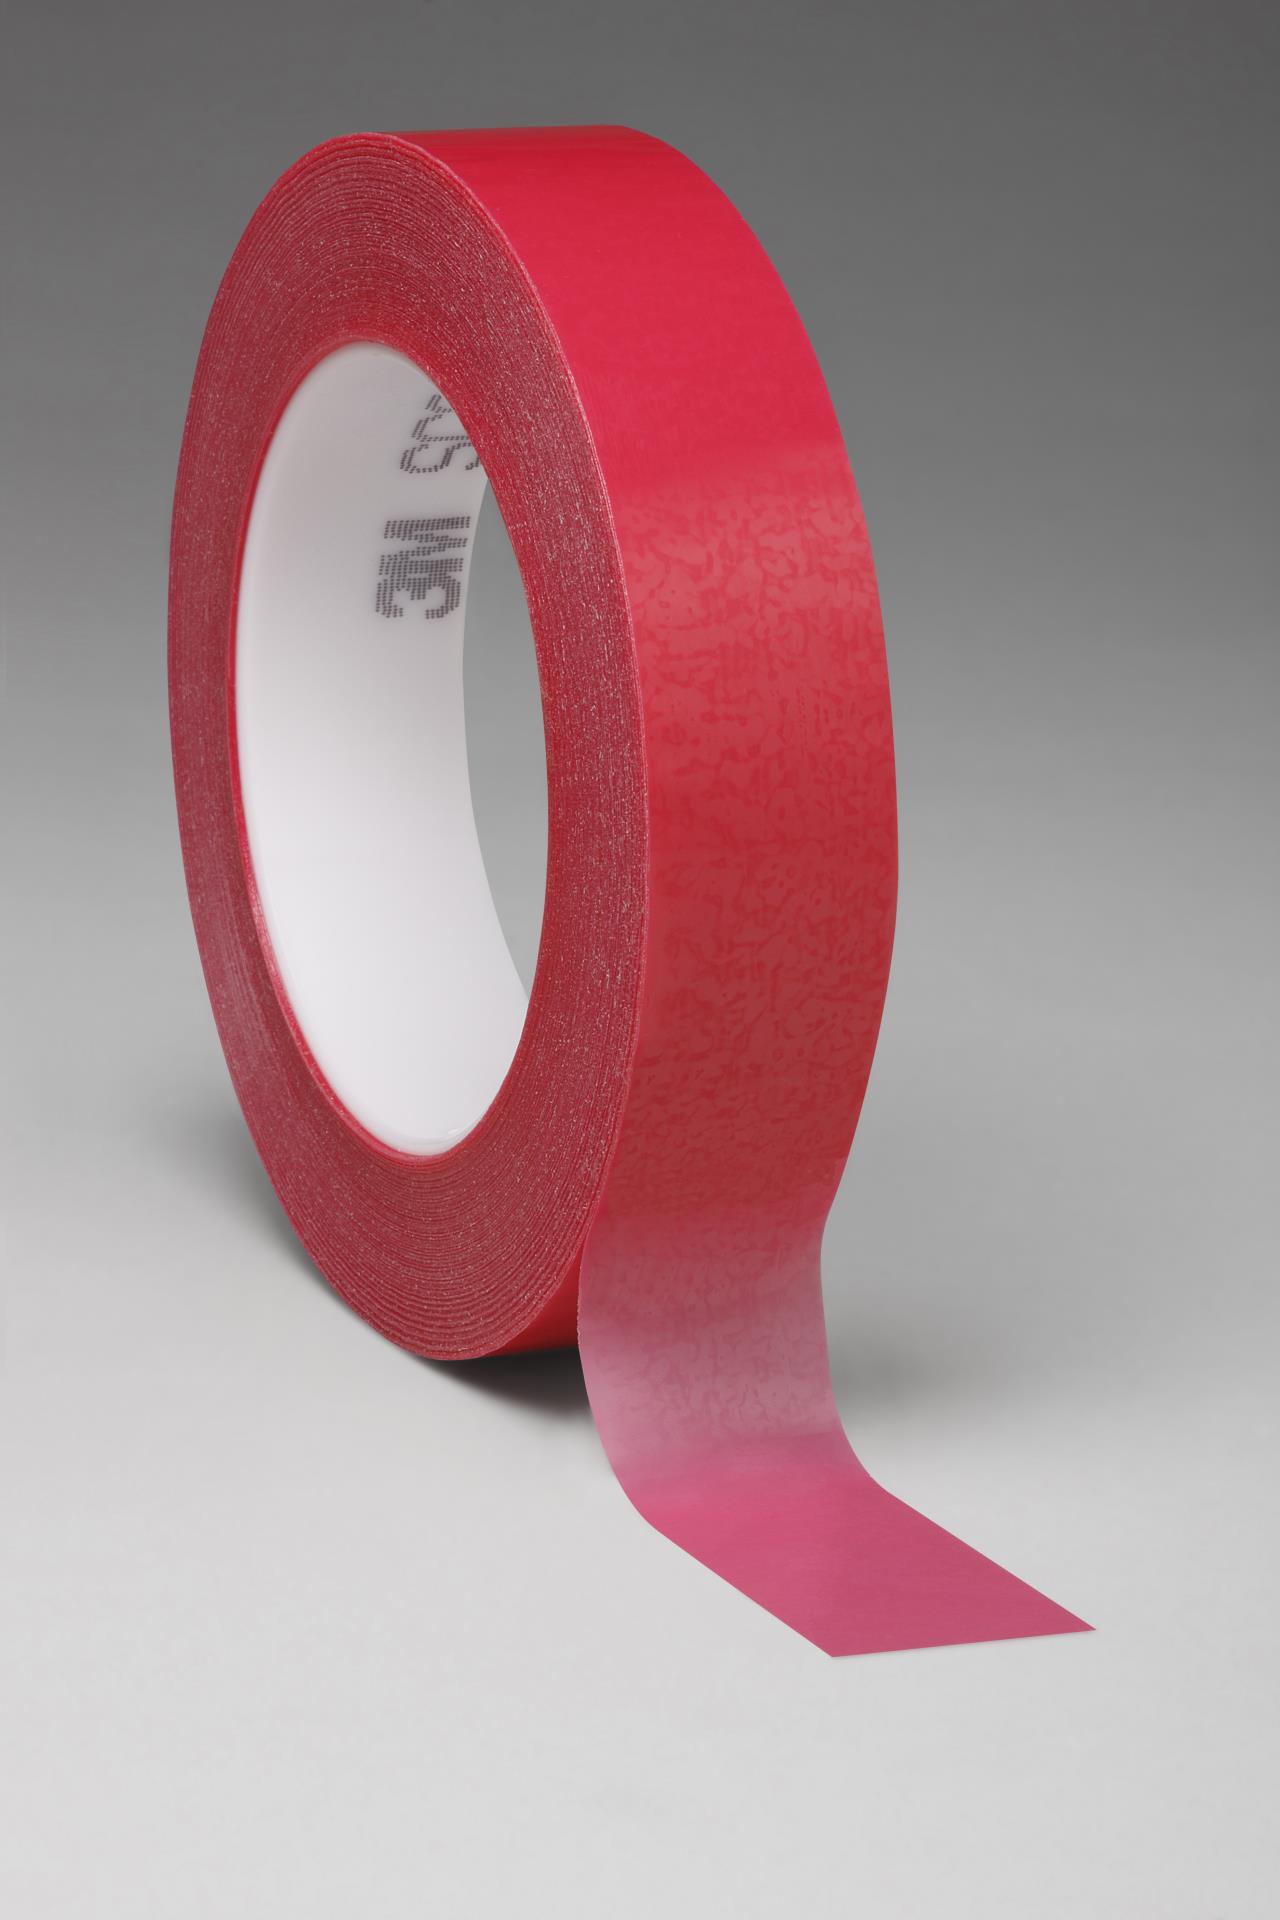 00021200112737 3M™ Circuit Plating Tape 1280 Red, 1/2 in x 72 yds x 4.2  mil, 72/Case, Bulk Aircraft products tapes 6292296